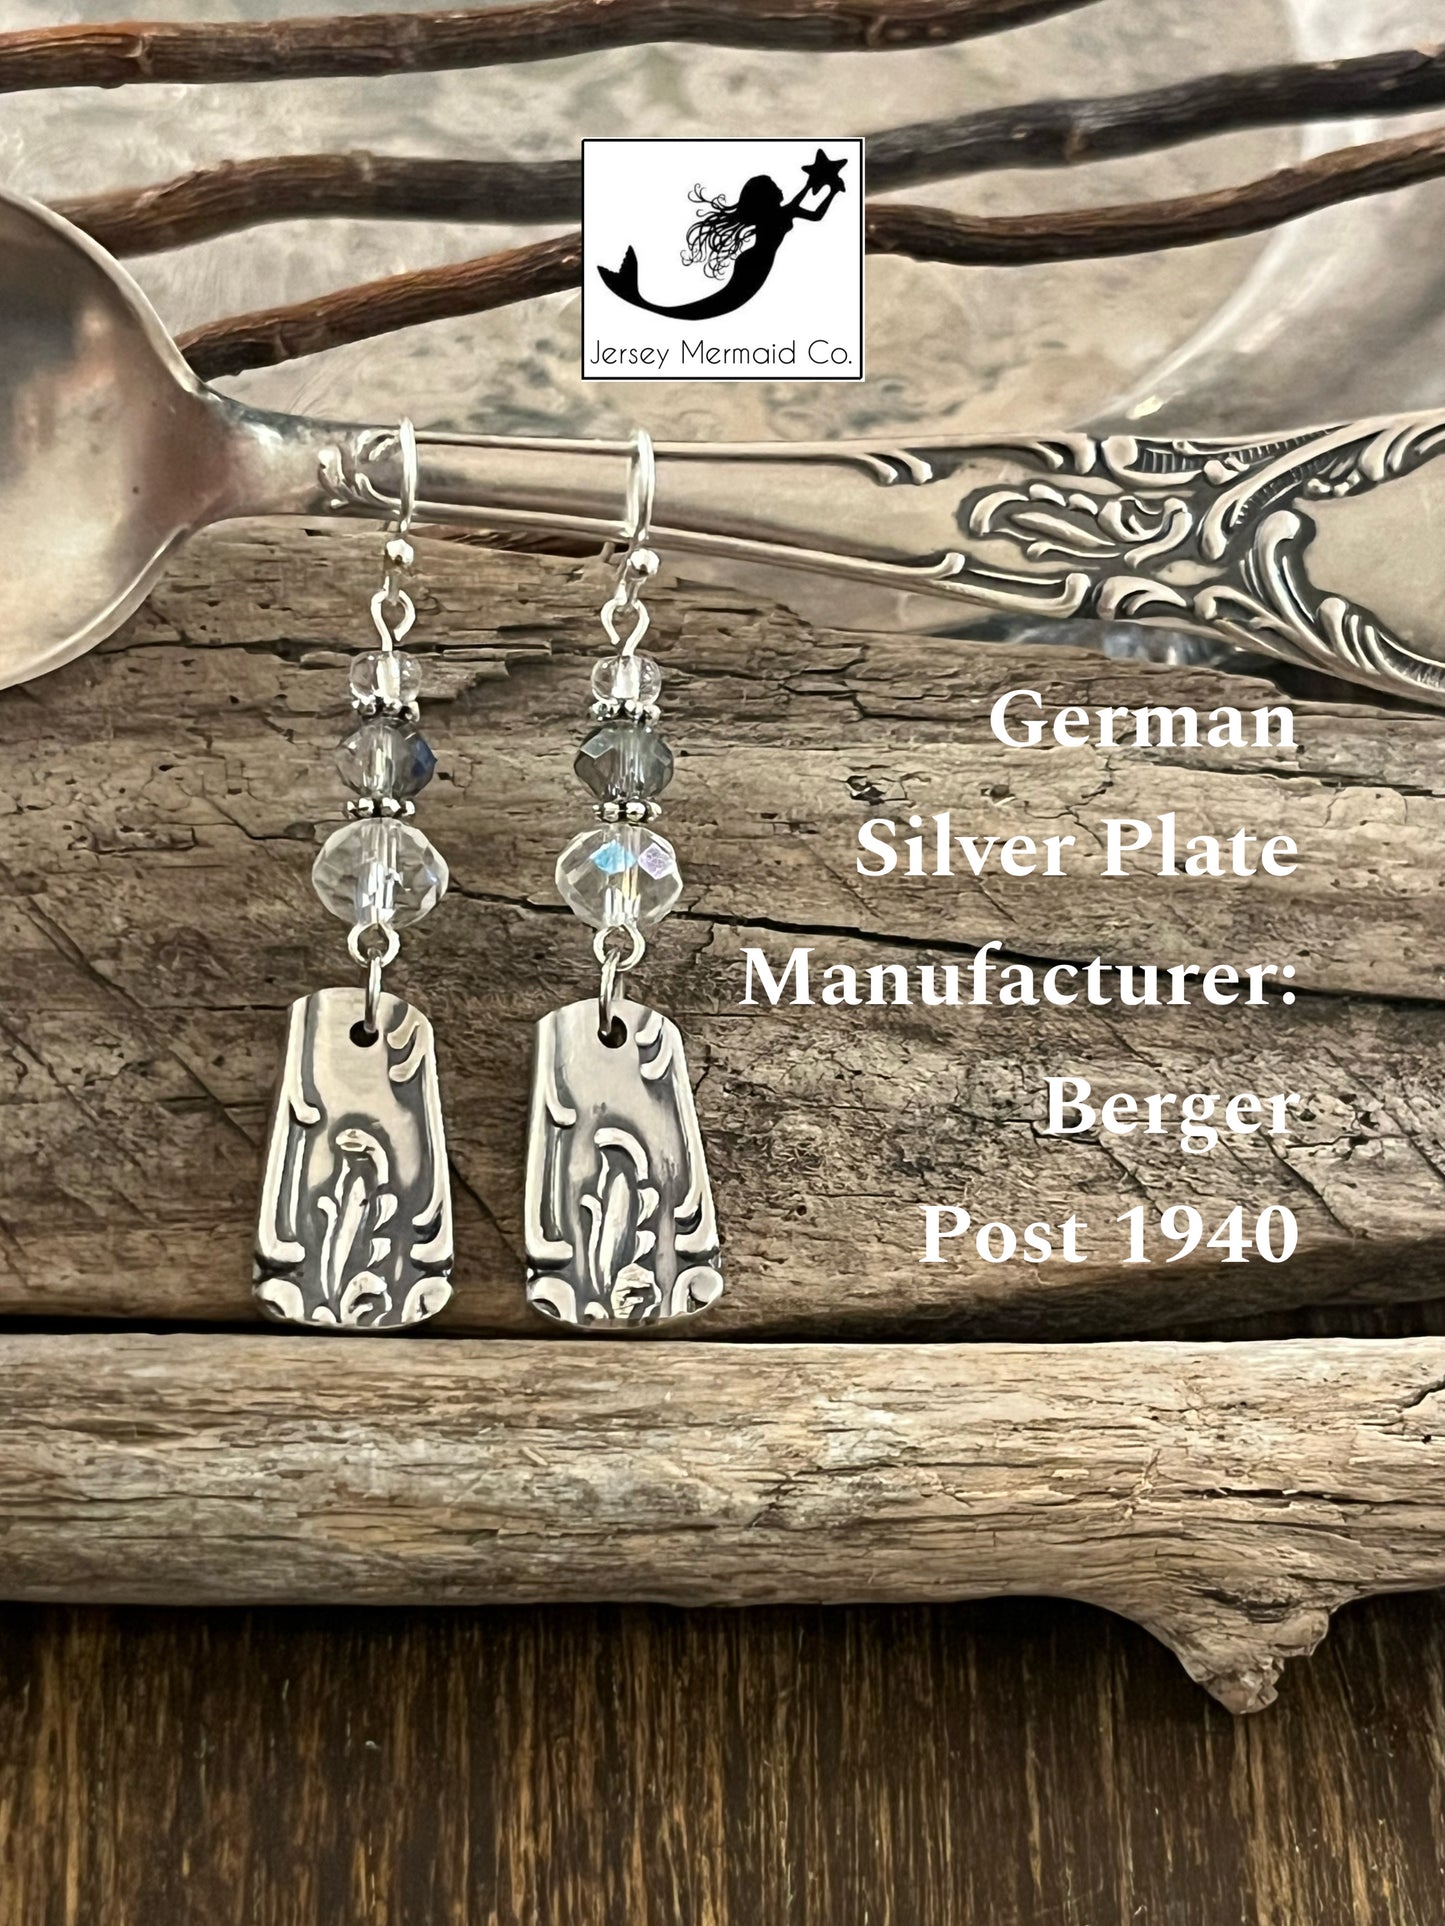 Earrings : German Silver Plate with beads , Post 1940